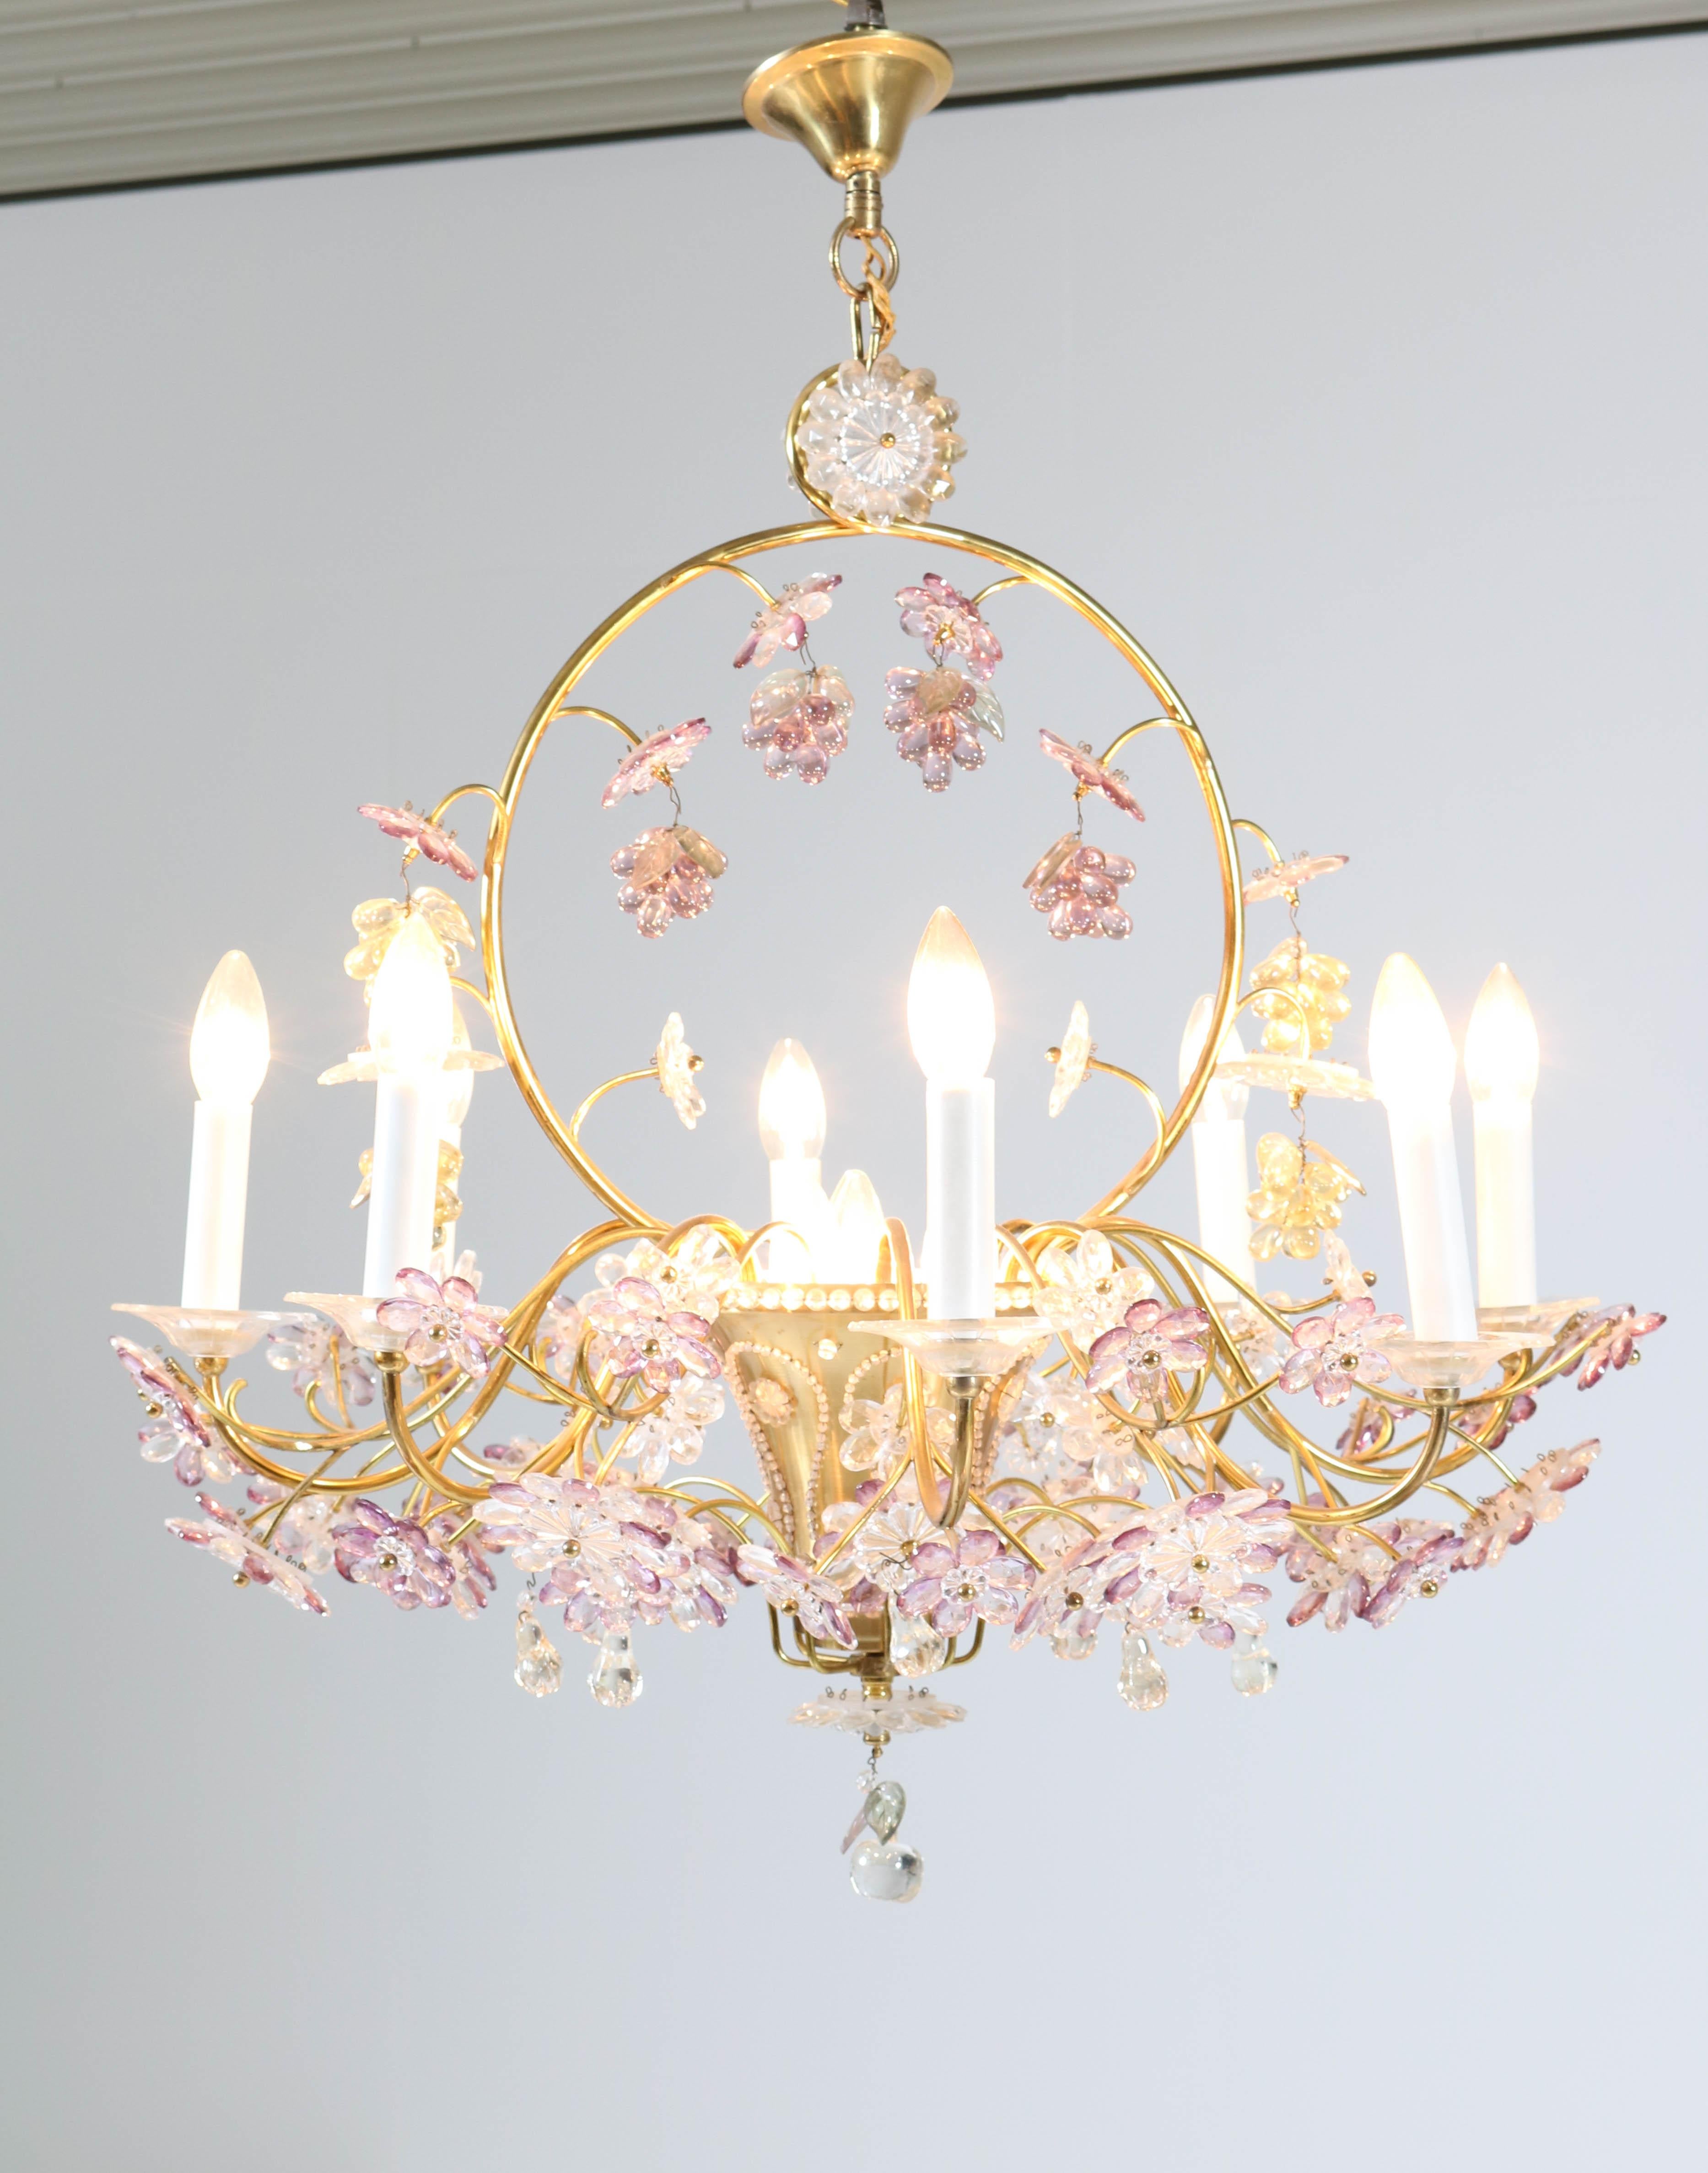 Brass French Floral Amethyst Crystal Chandelier in the style of Maison Baguès, 1950s